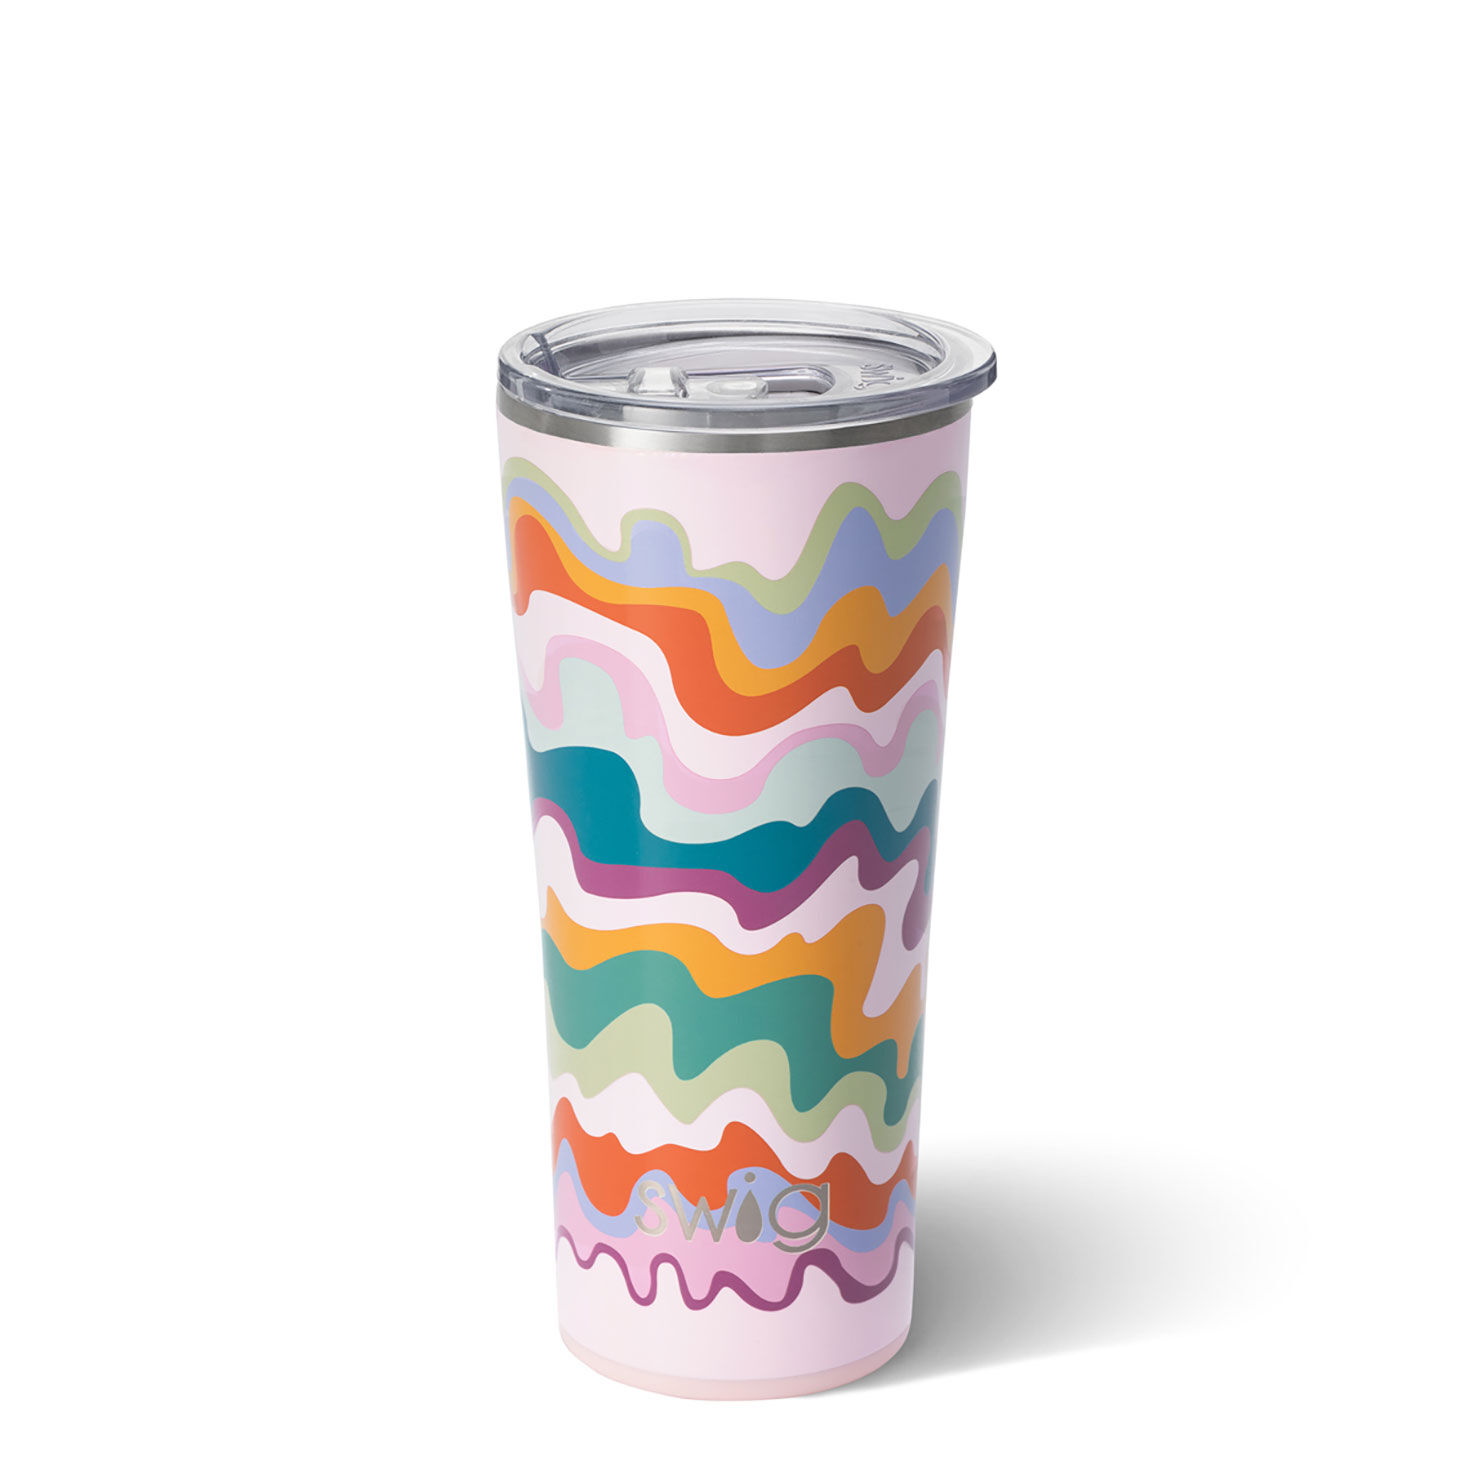 https://www.hallmark.com/dw/image/v2/AALB_PRD/on/demandware.static/-/Sites-hallmark-master/default/dw5998fd4c/images/finished-goods/products/S102C22SA/Colored-Wave-Design-Insulated-Cup-With-Lid_S102C22SA_01.jpg?sfrm=jpg